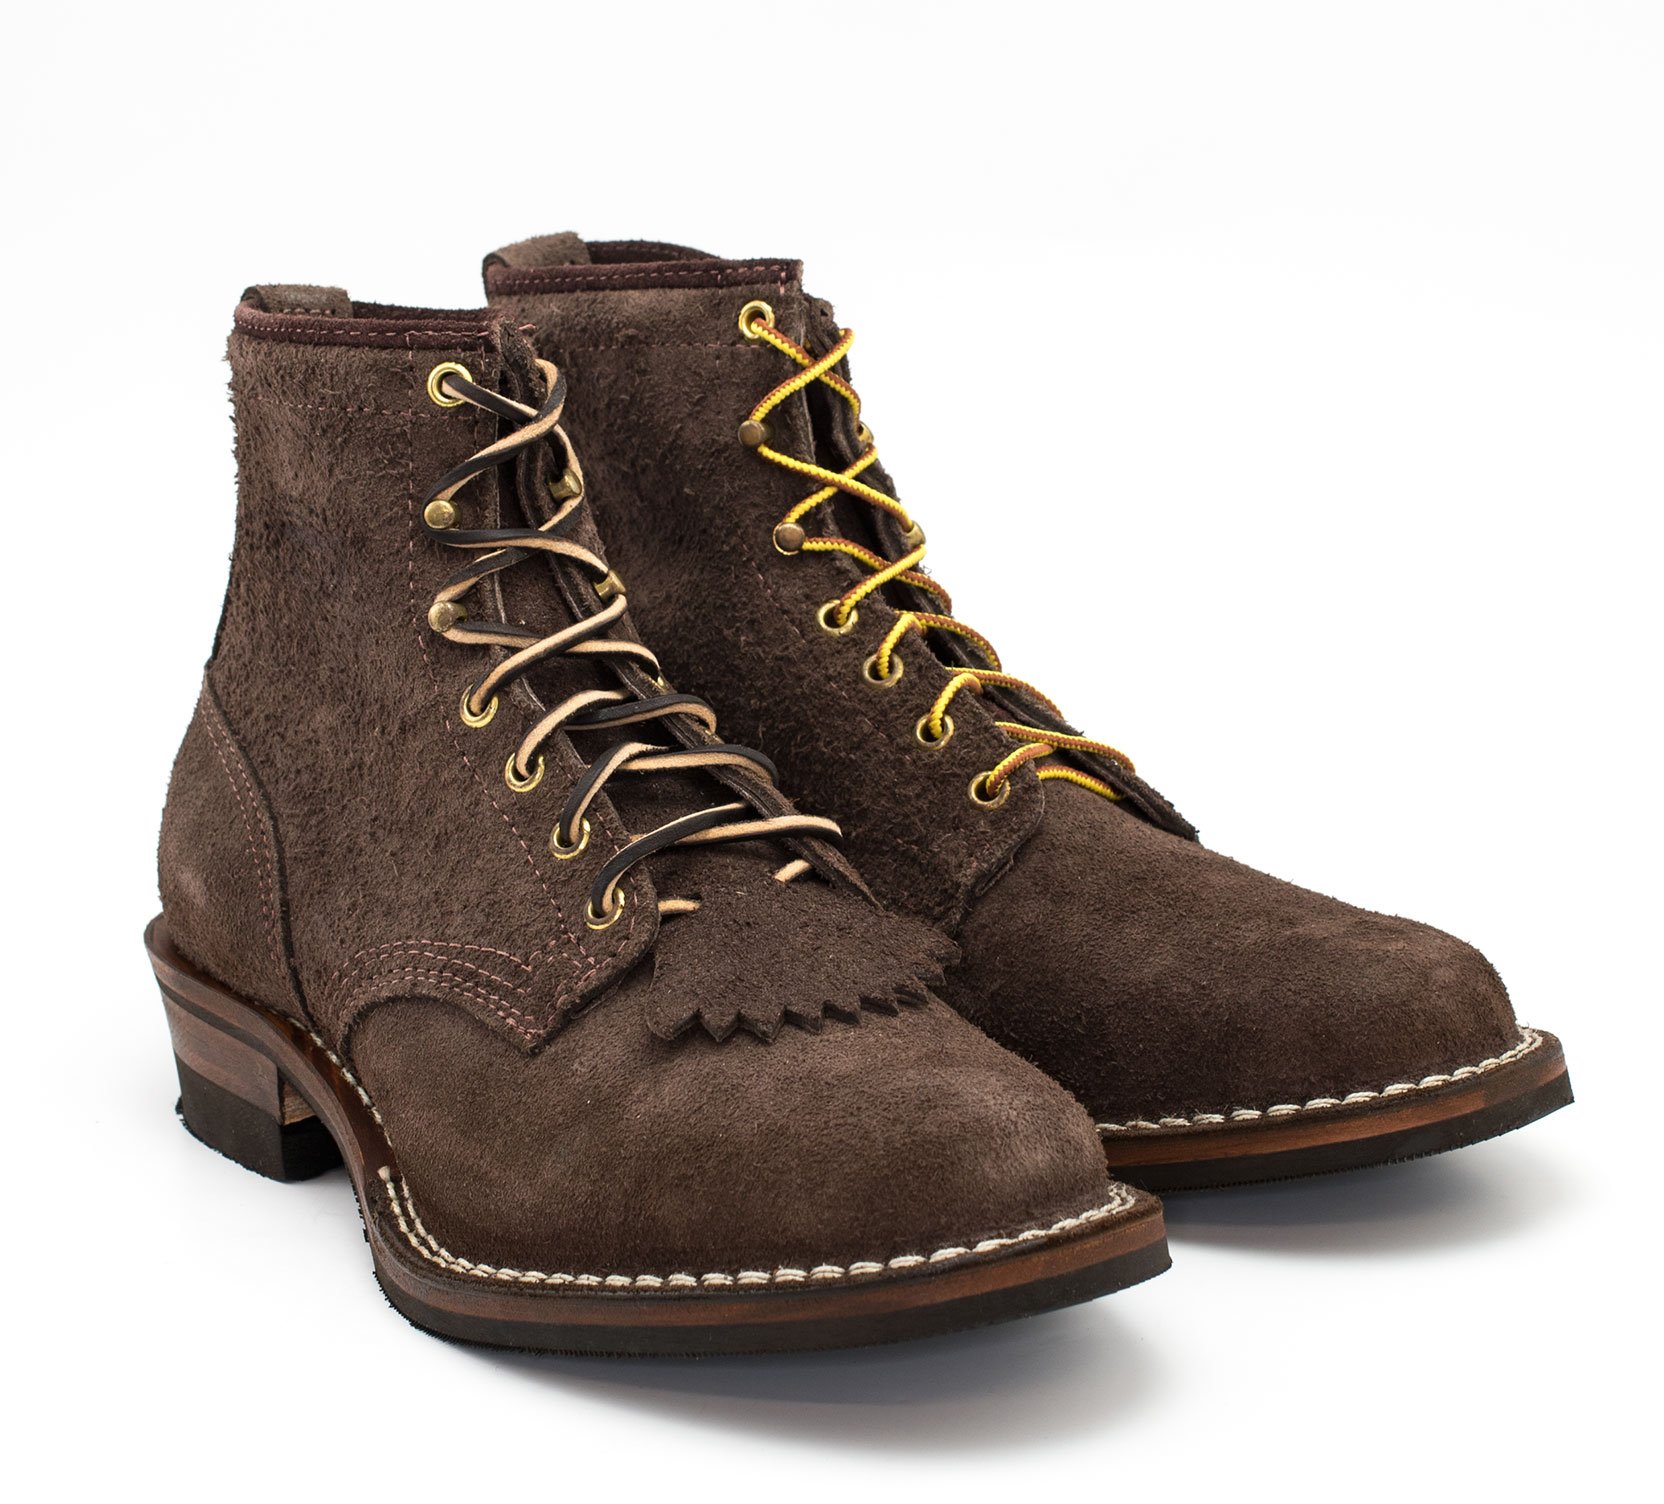 Iron Heart/Wesco - Rough Out Packer Boot